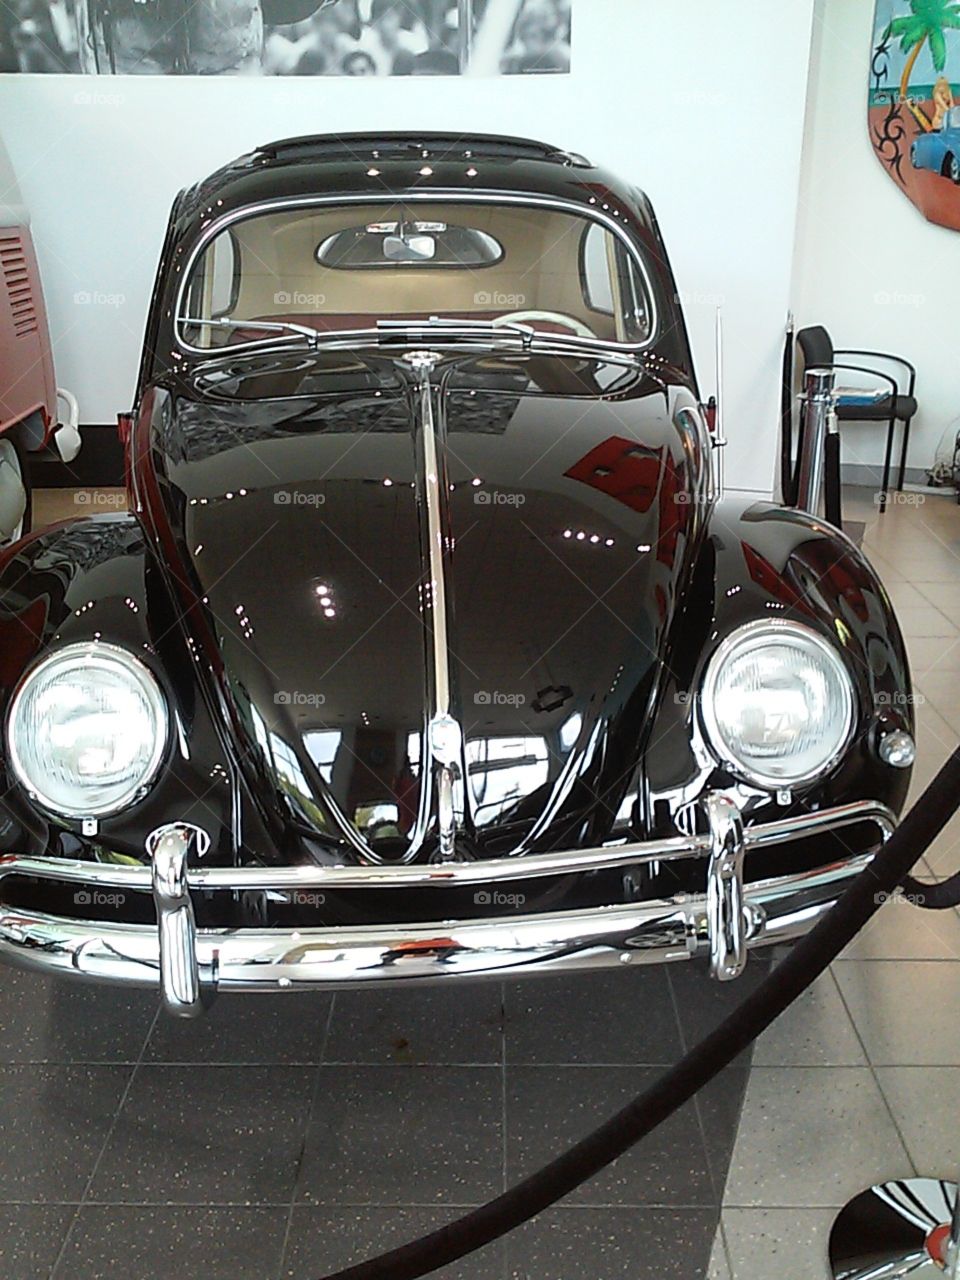 The Car . the beautiful Volkswagen